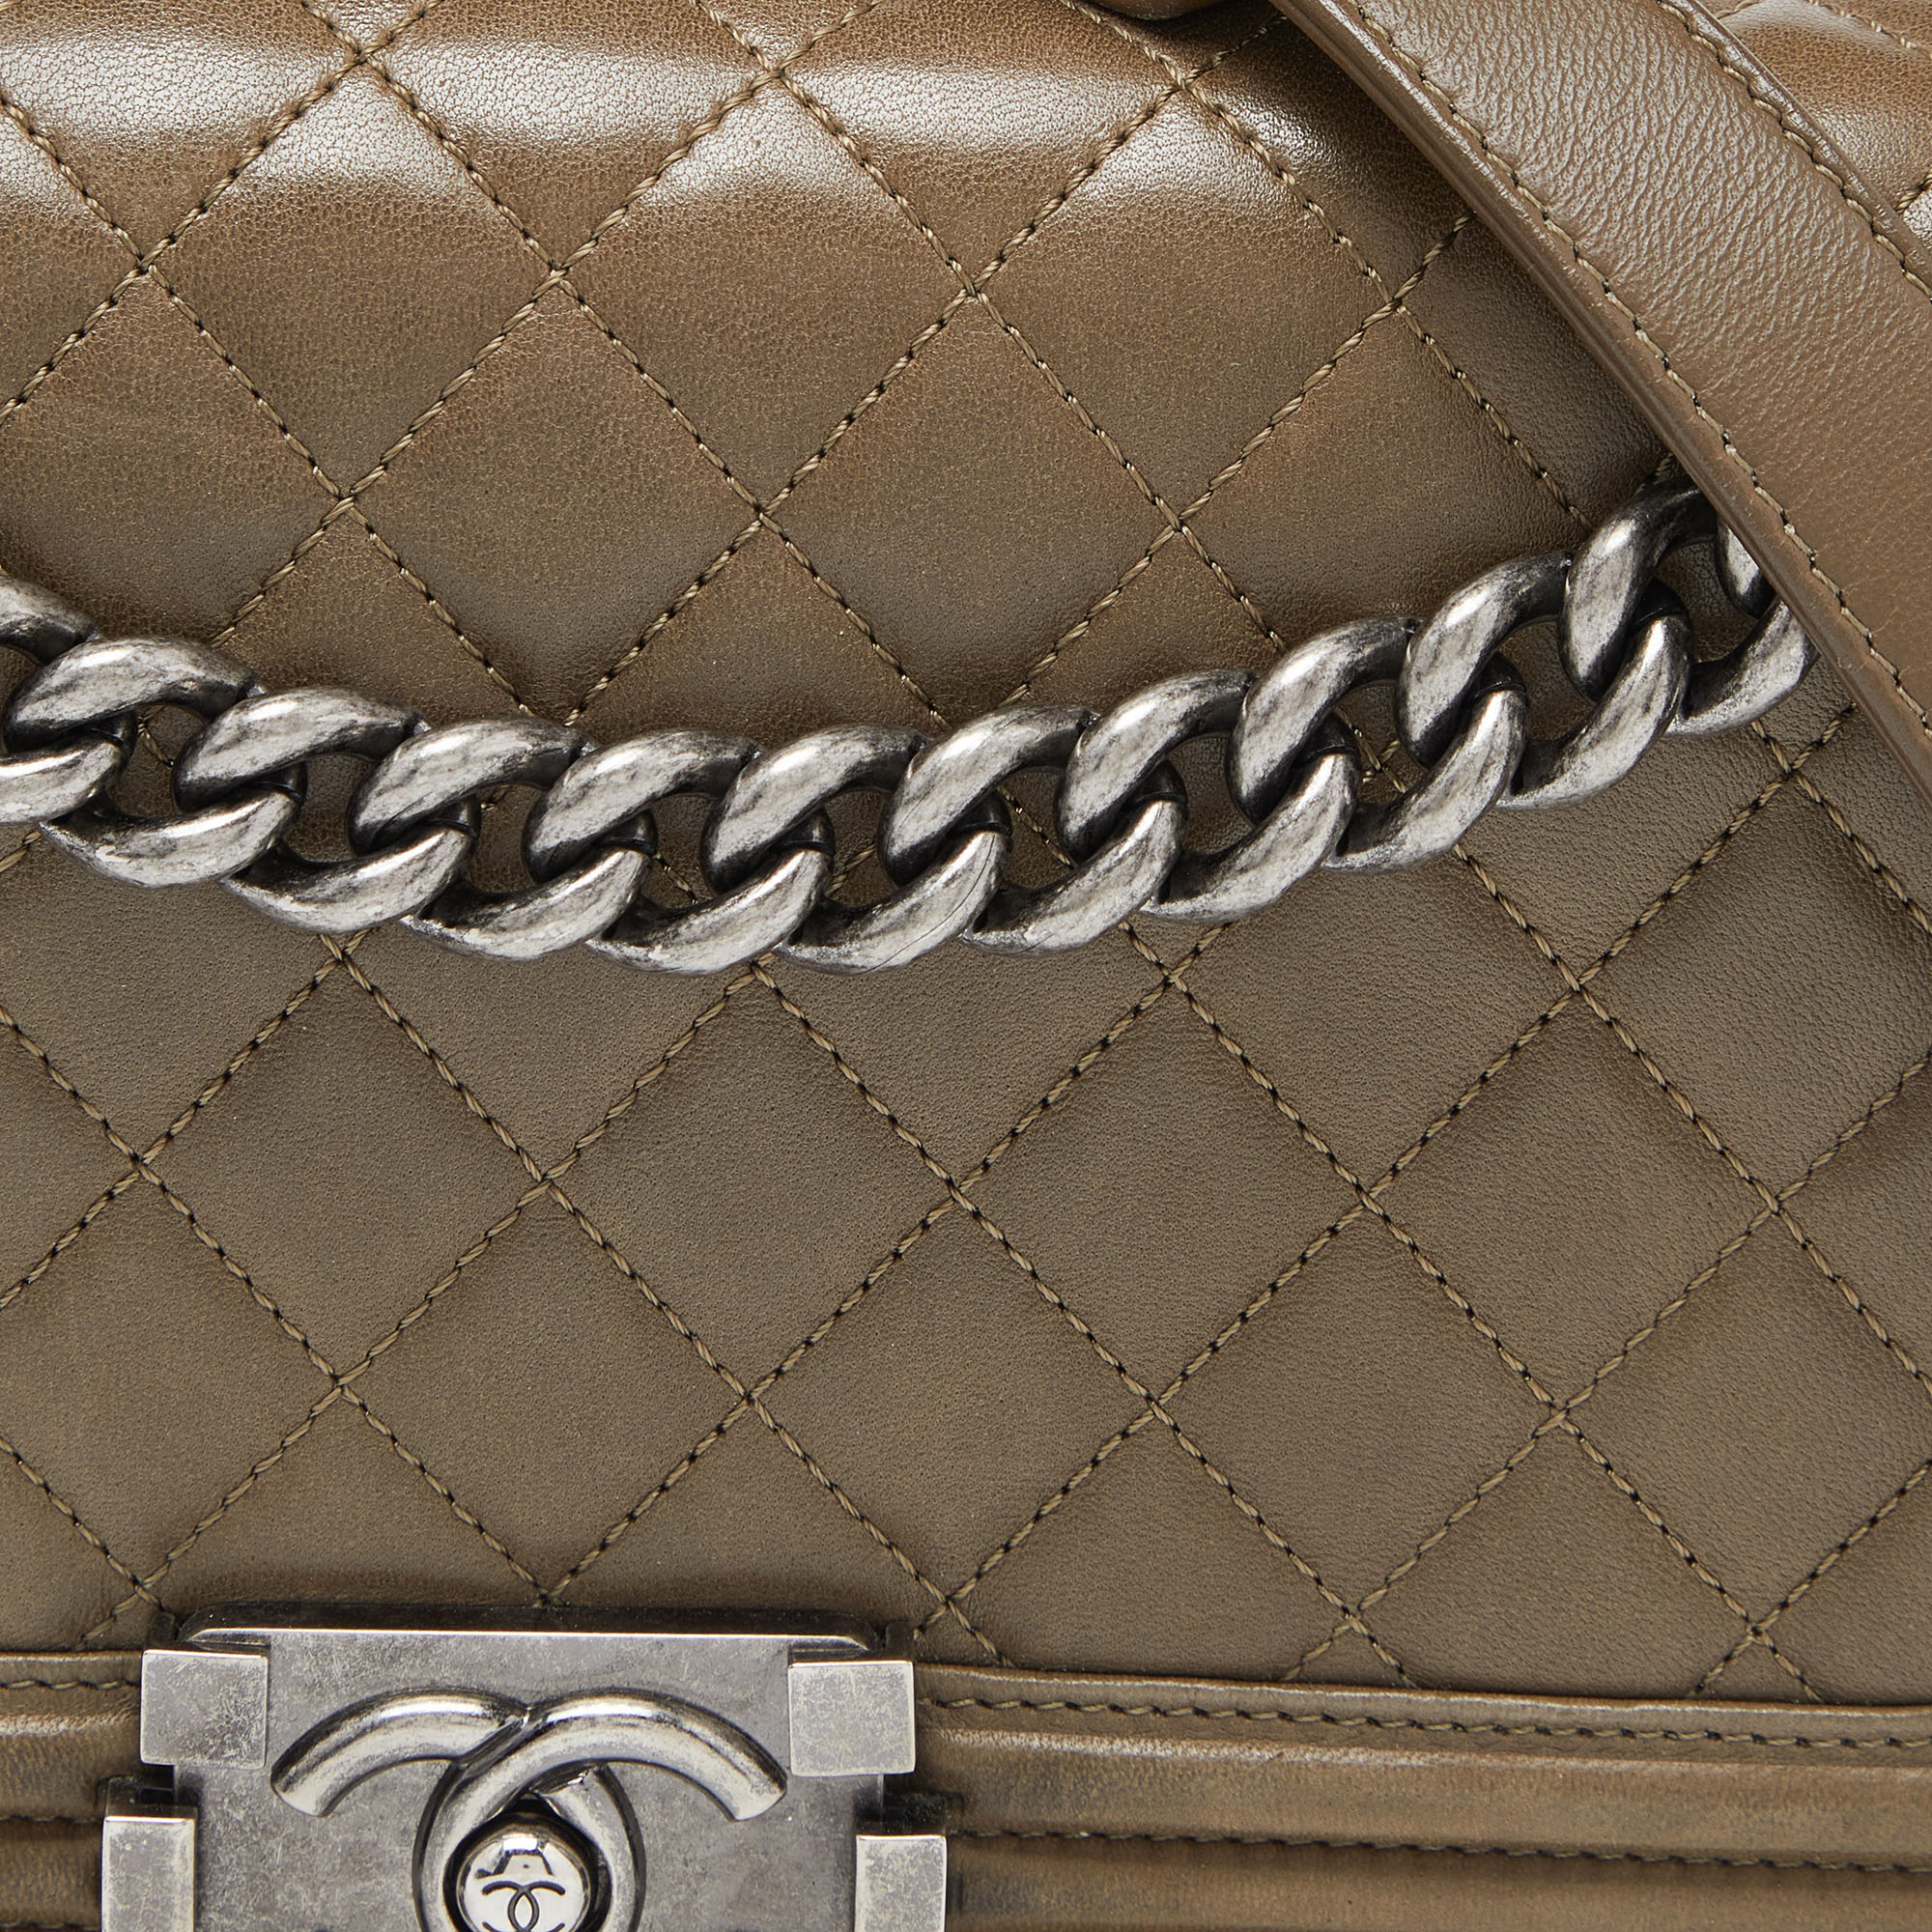 Chanel Green Quilted Leather Medium Boy Flap Bag